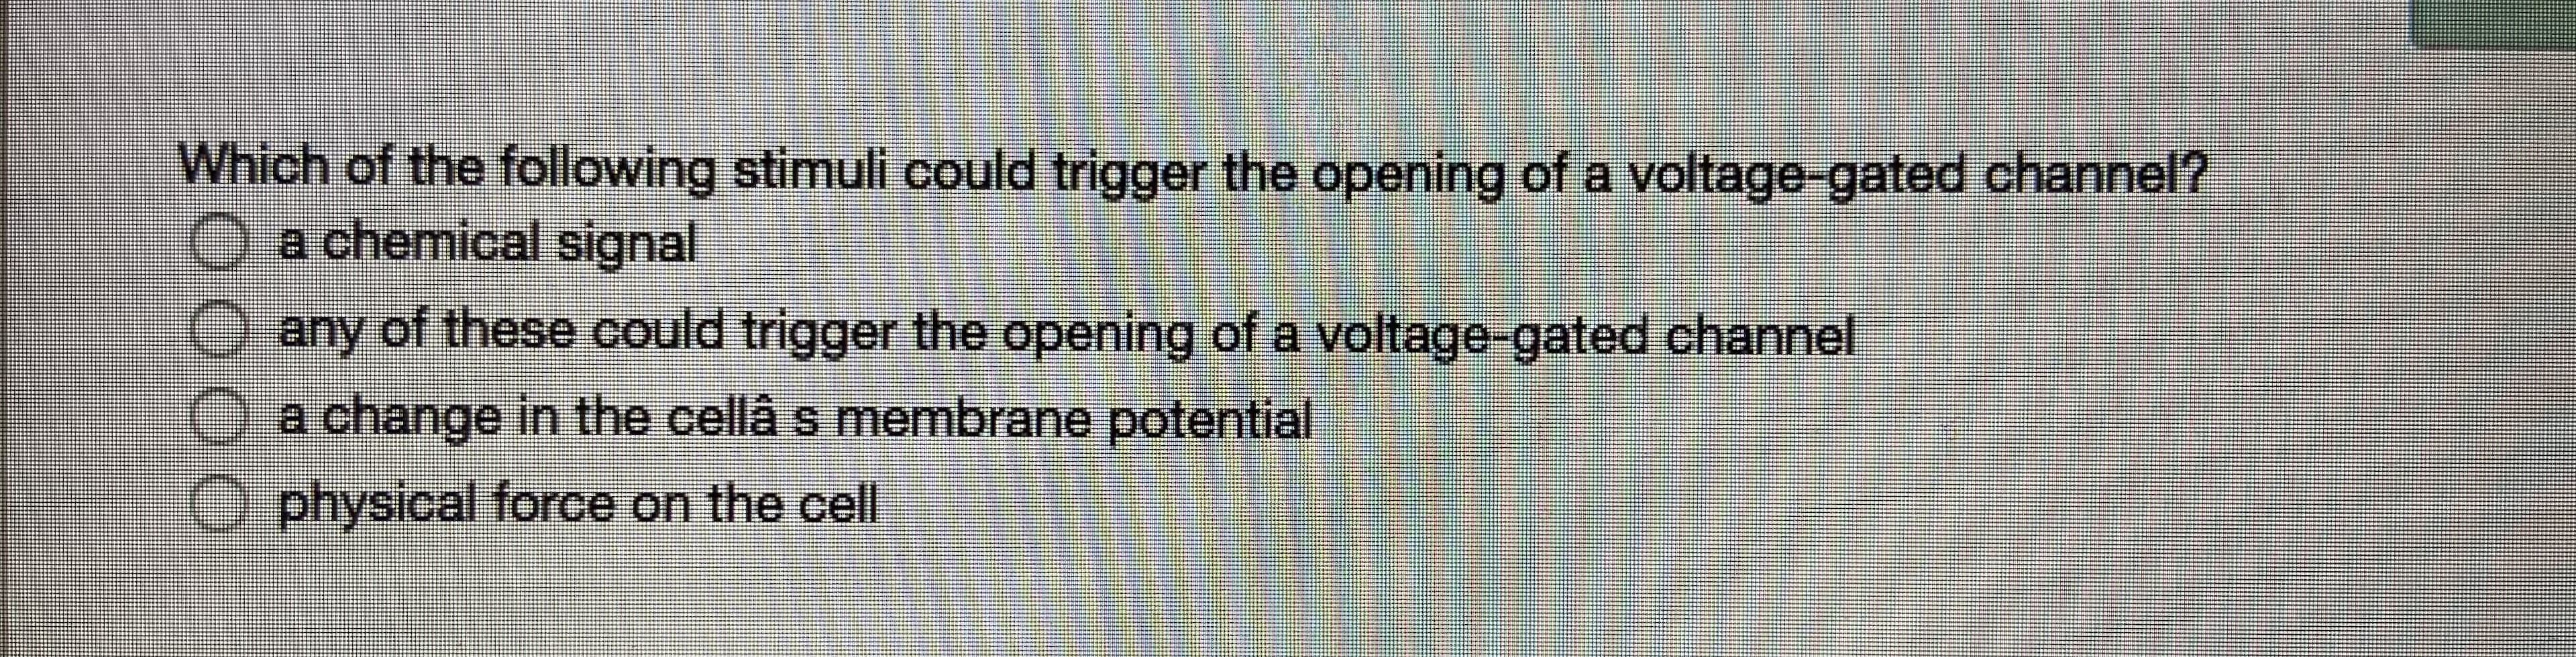 Which of the following stimuli could trigger the opening of a voltage-gated channel?
O a chemical signal
any of these could trigger the opening of a voltage-gated channel
Oa change in the cellâ s membrane potential
physical force on the cell
